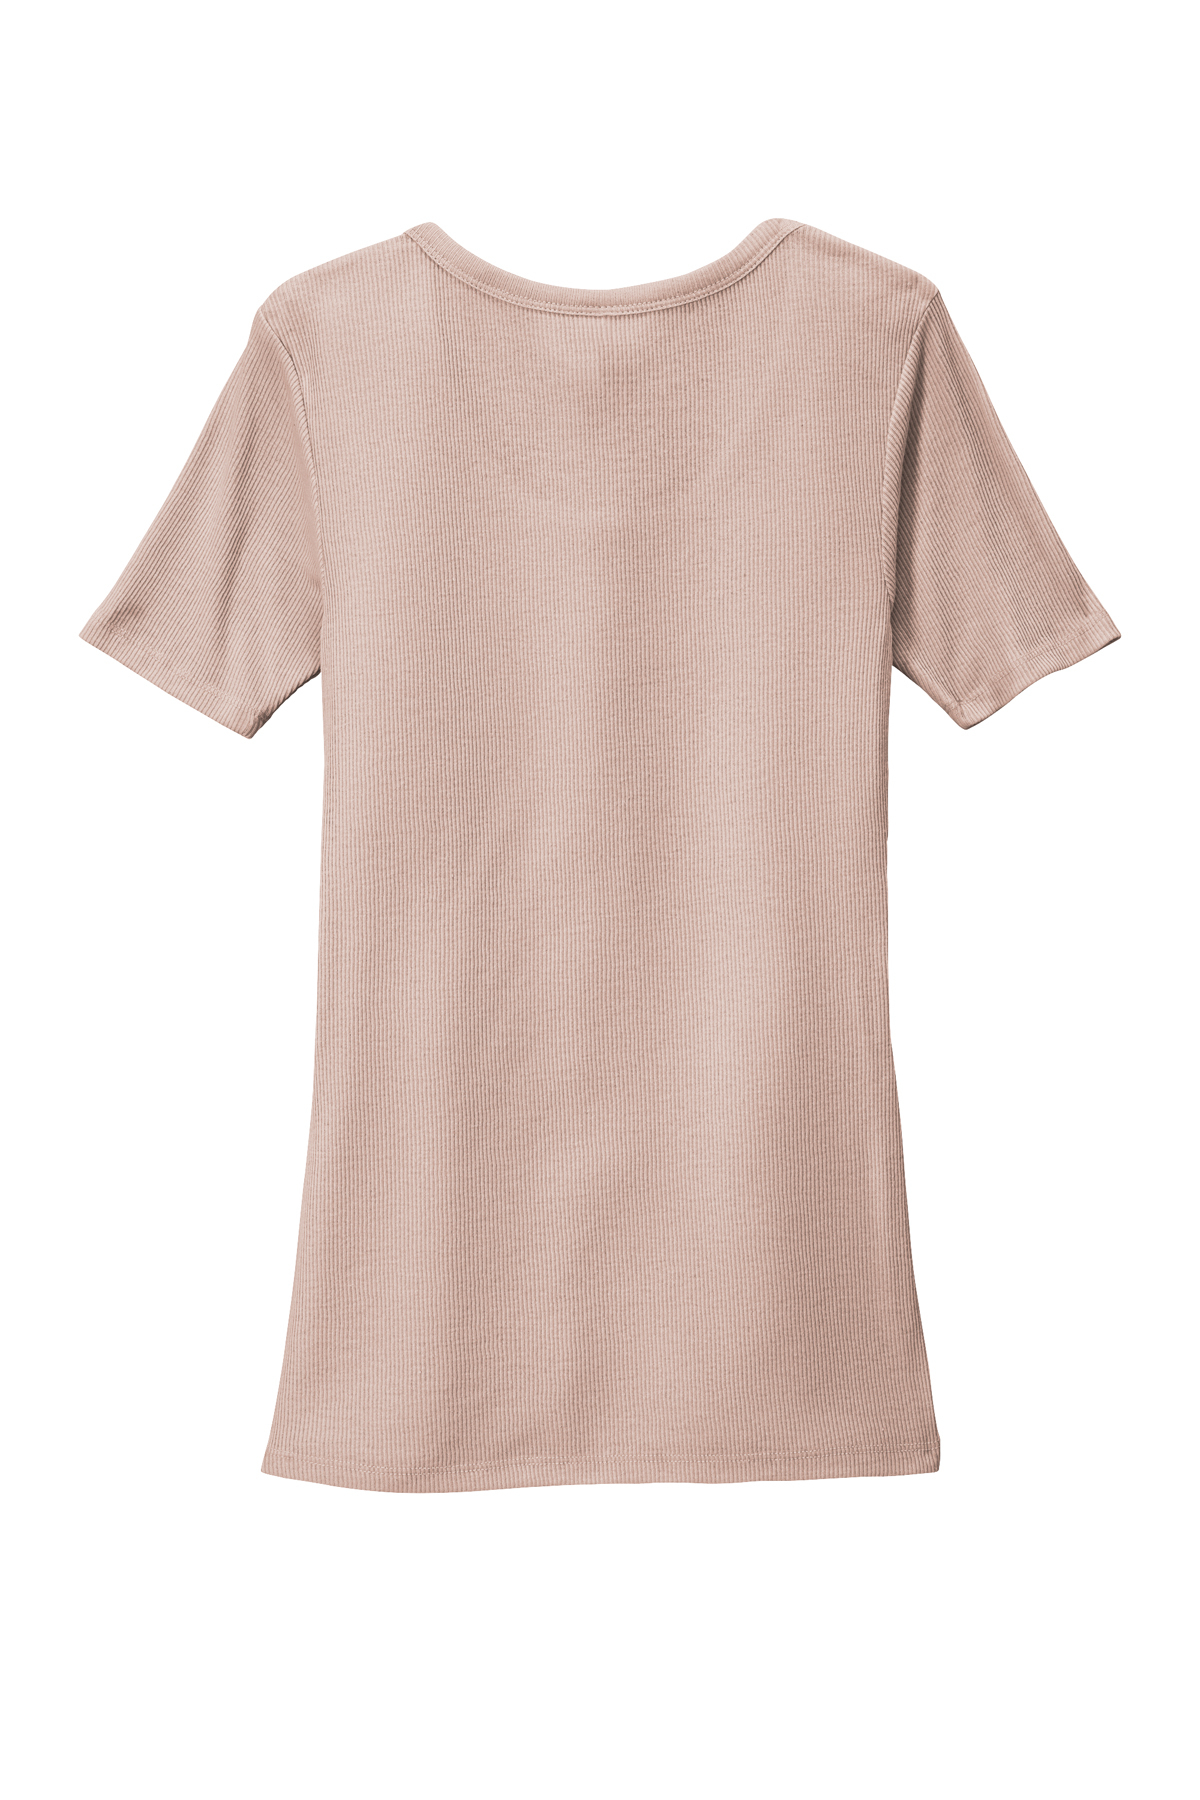 District Women's V.I.T. Rib Scoop Neck Tee, Product